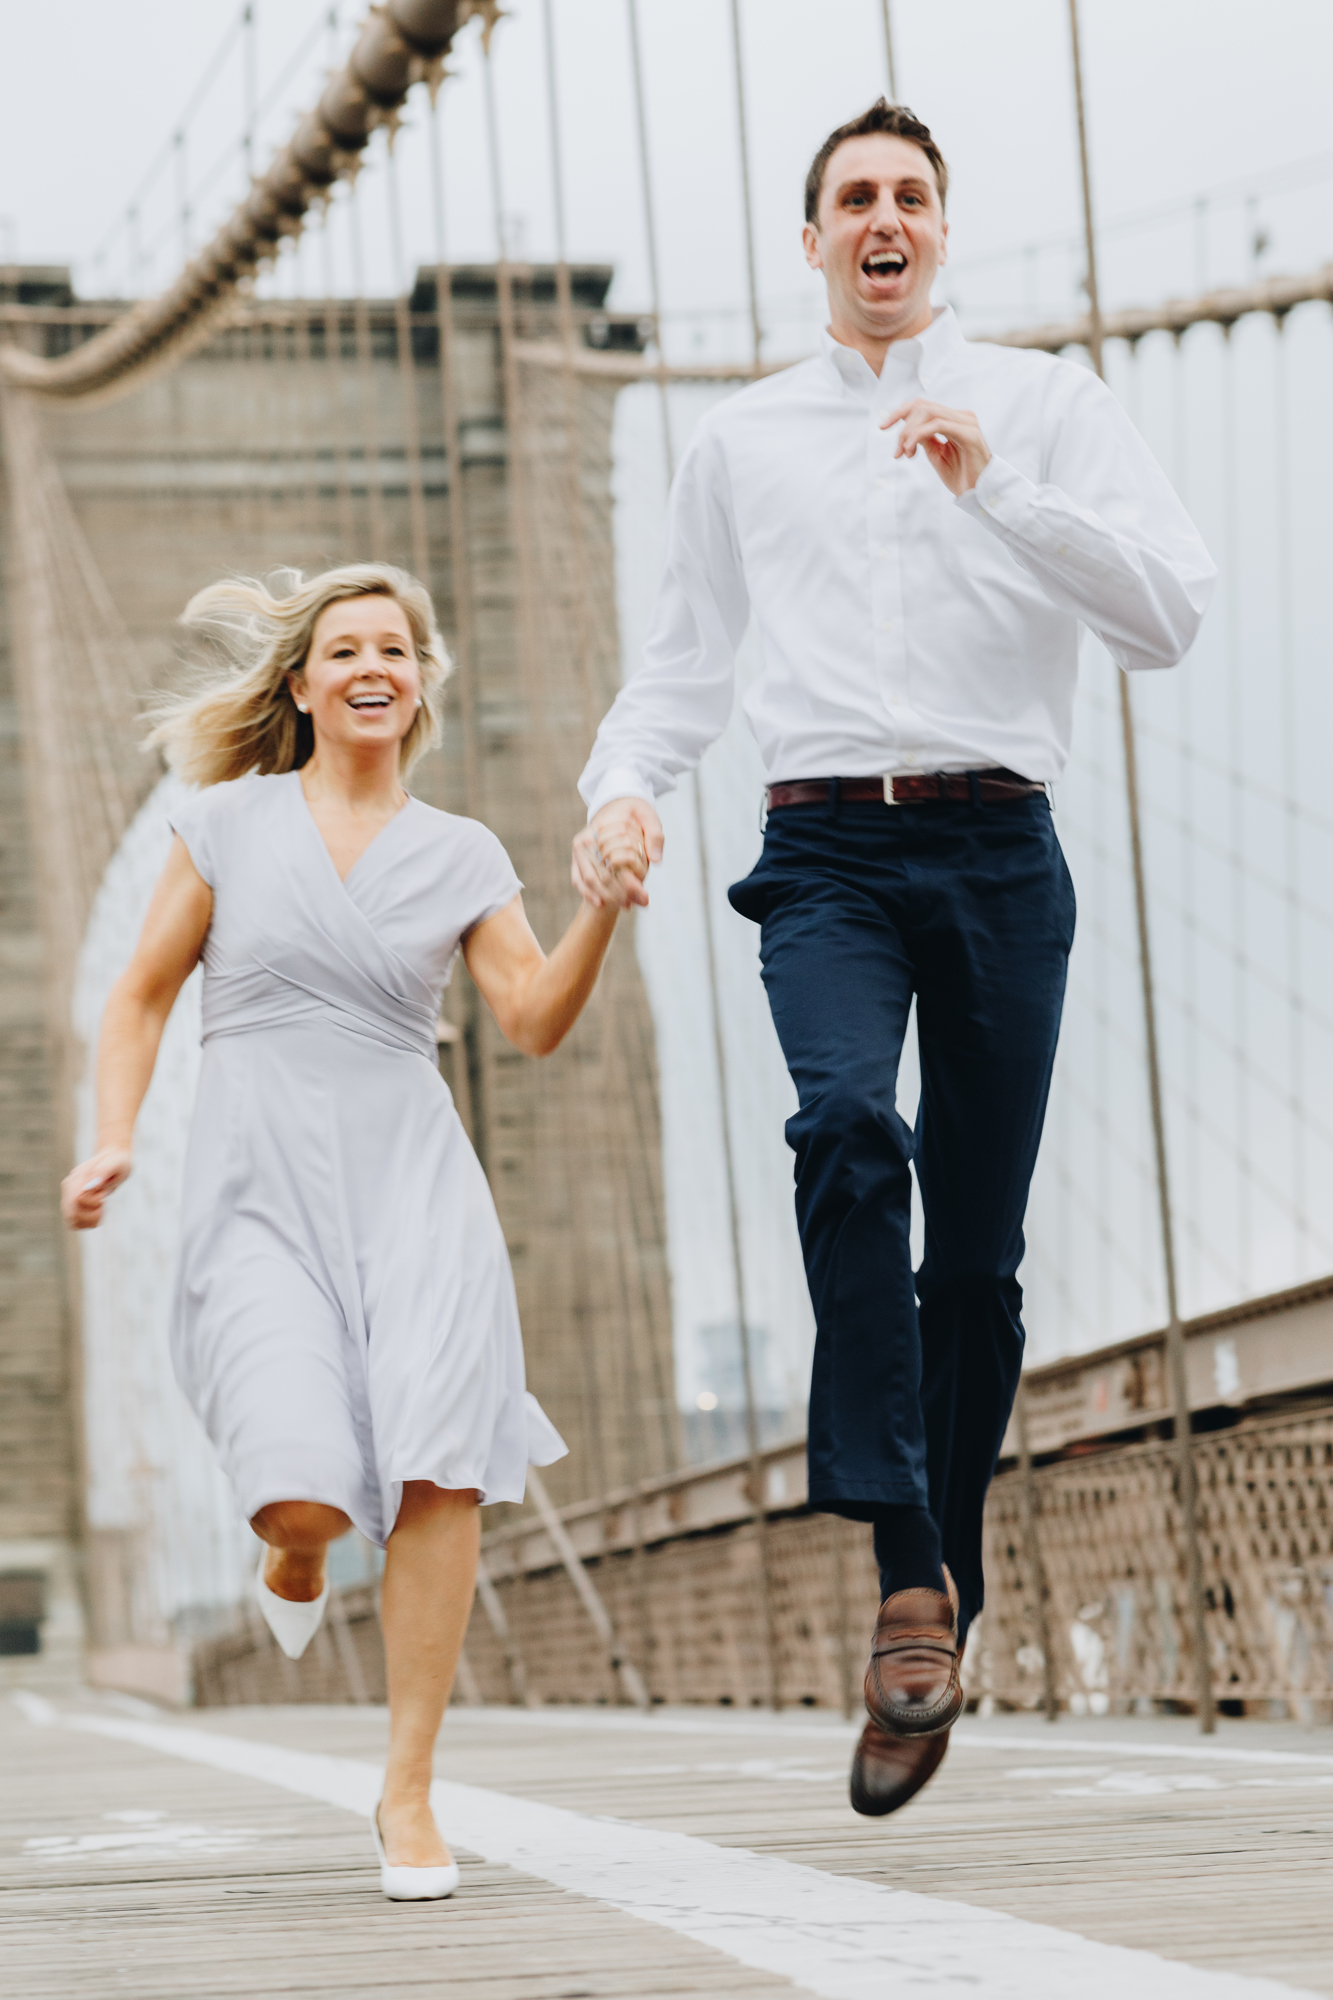 Iconic Brooklyn Bridge Park Engagement Photos on a Cloudy Day in New York